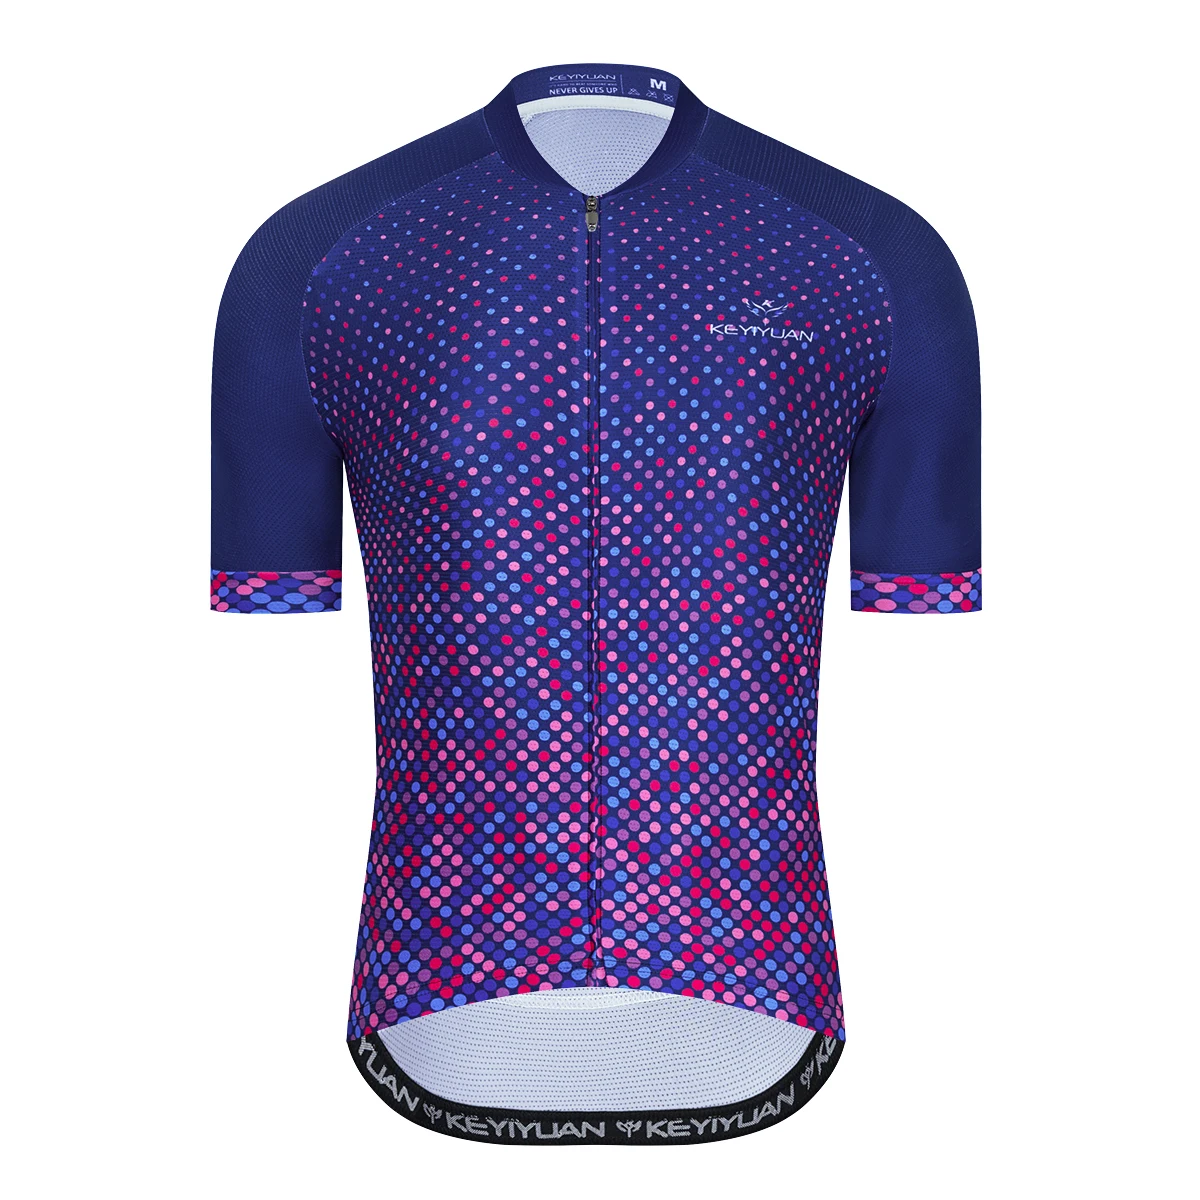 KEYIYUAN Funny Men's Cycling Jersey Bicycle Top Cycle Clothes Short Sleeve Racing Bike Shirt Mtb Sports Wear Tenue Velo Homme